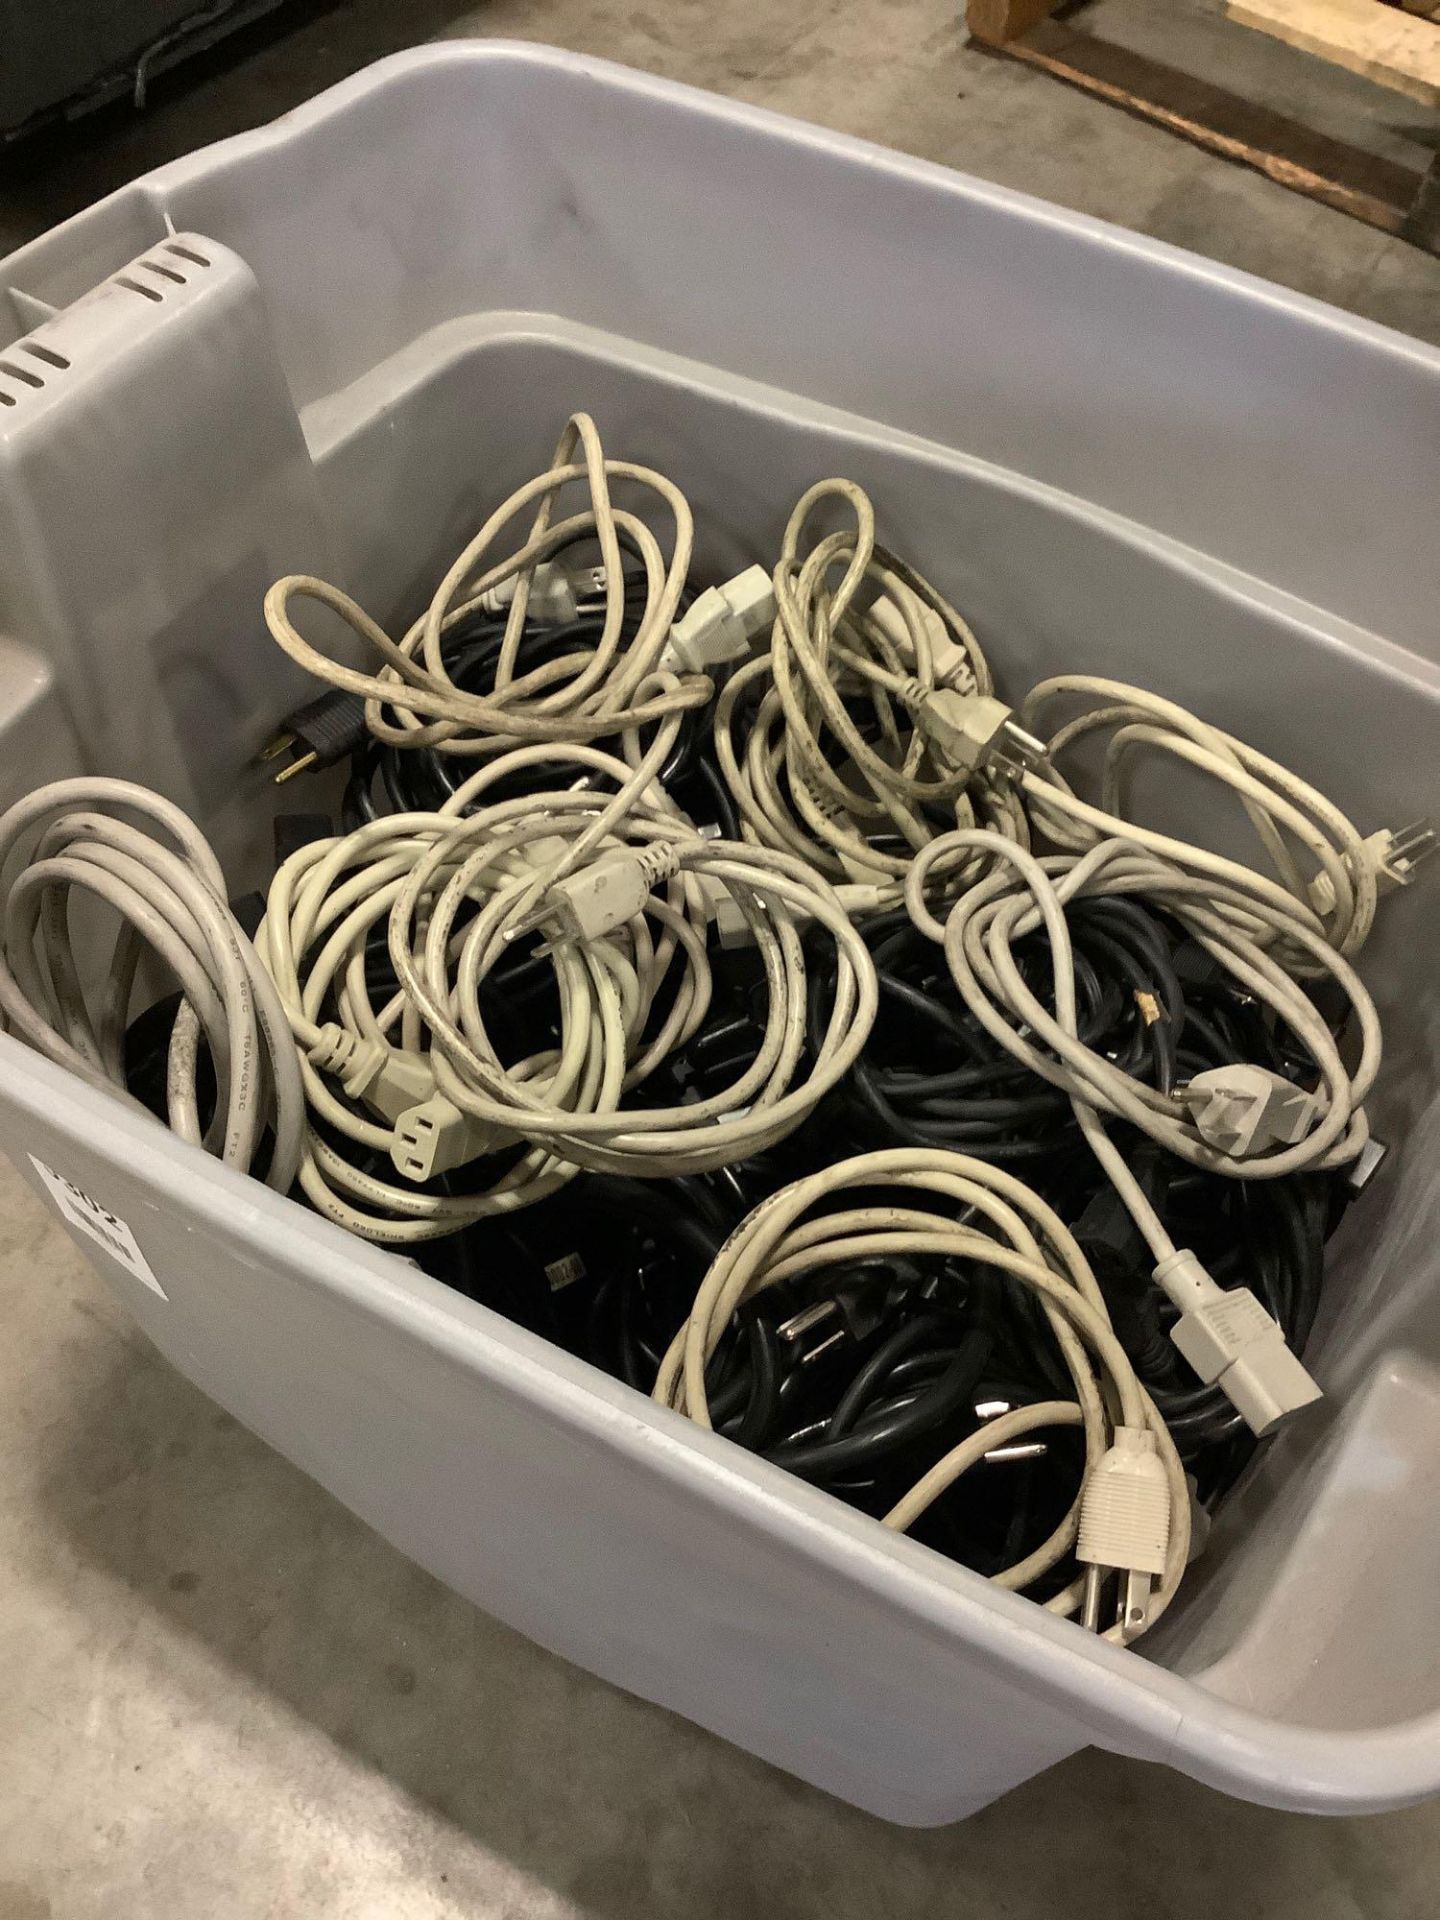 70 COMPUTER CORDS - Image 6 of 6